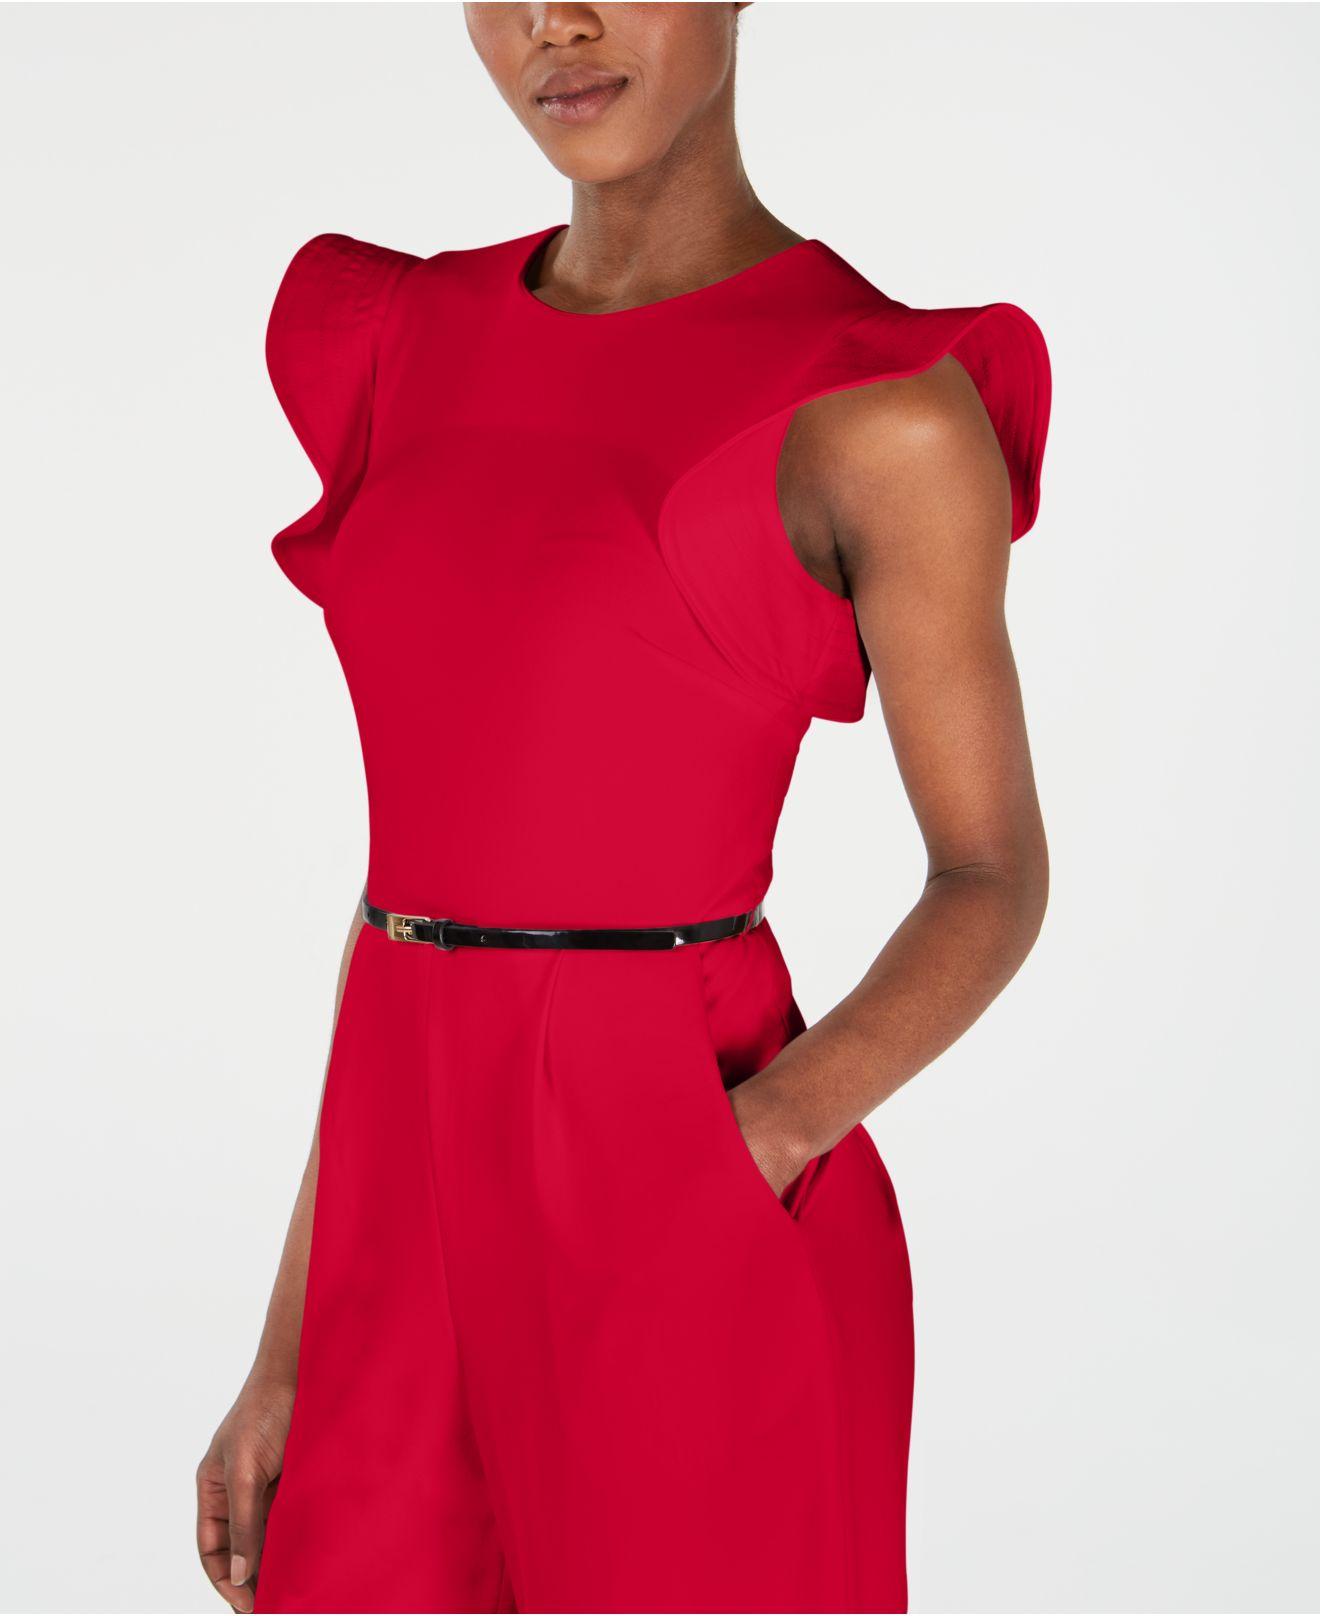 Calvin Klein Petite Belted Ruffle-sleeve Jumpsuit in Red | Lyst